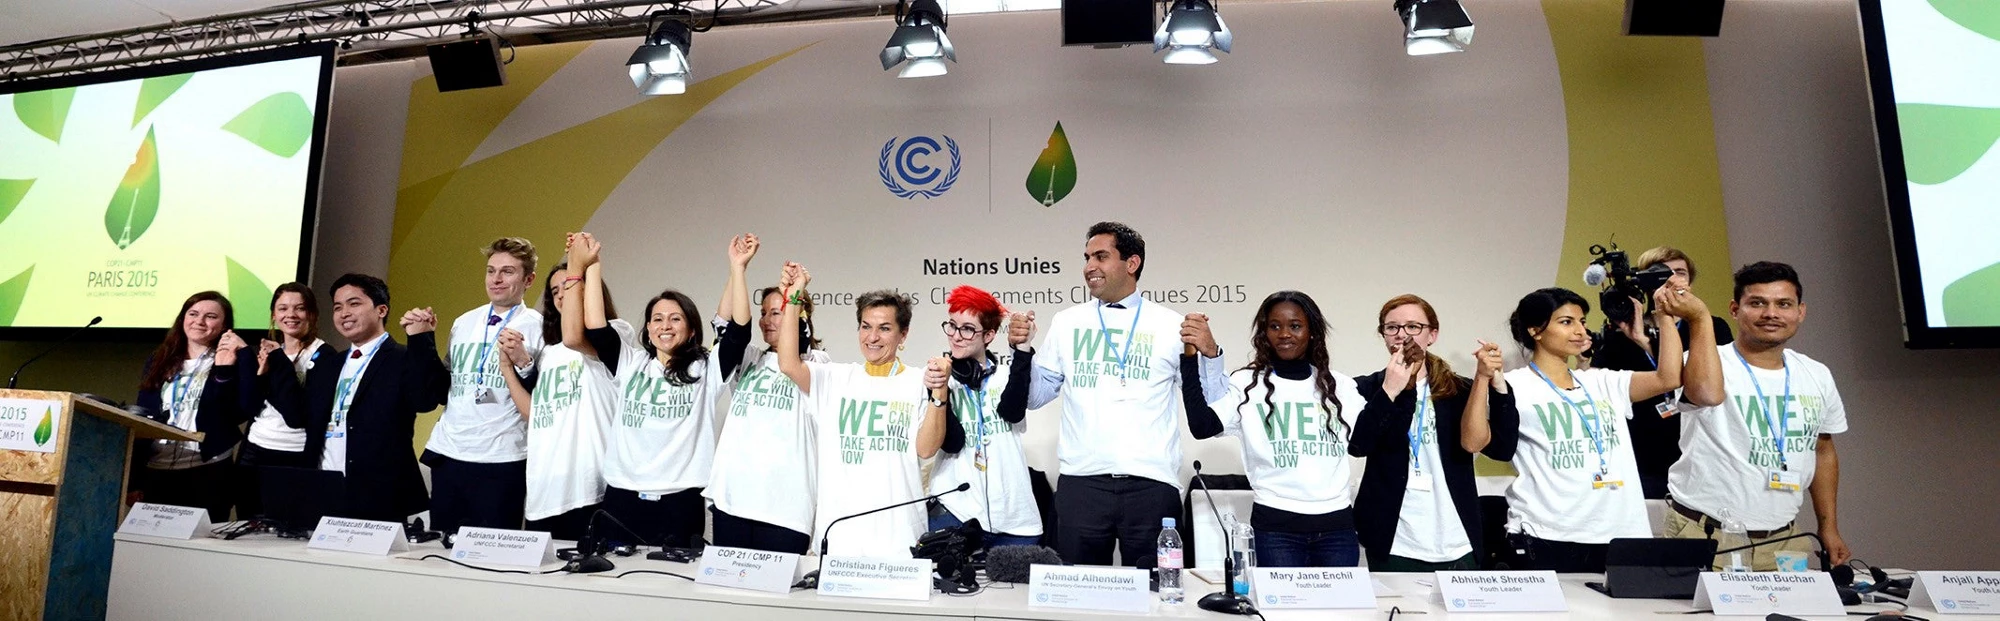 Youth and Future Generations Day at COP21.